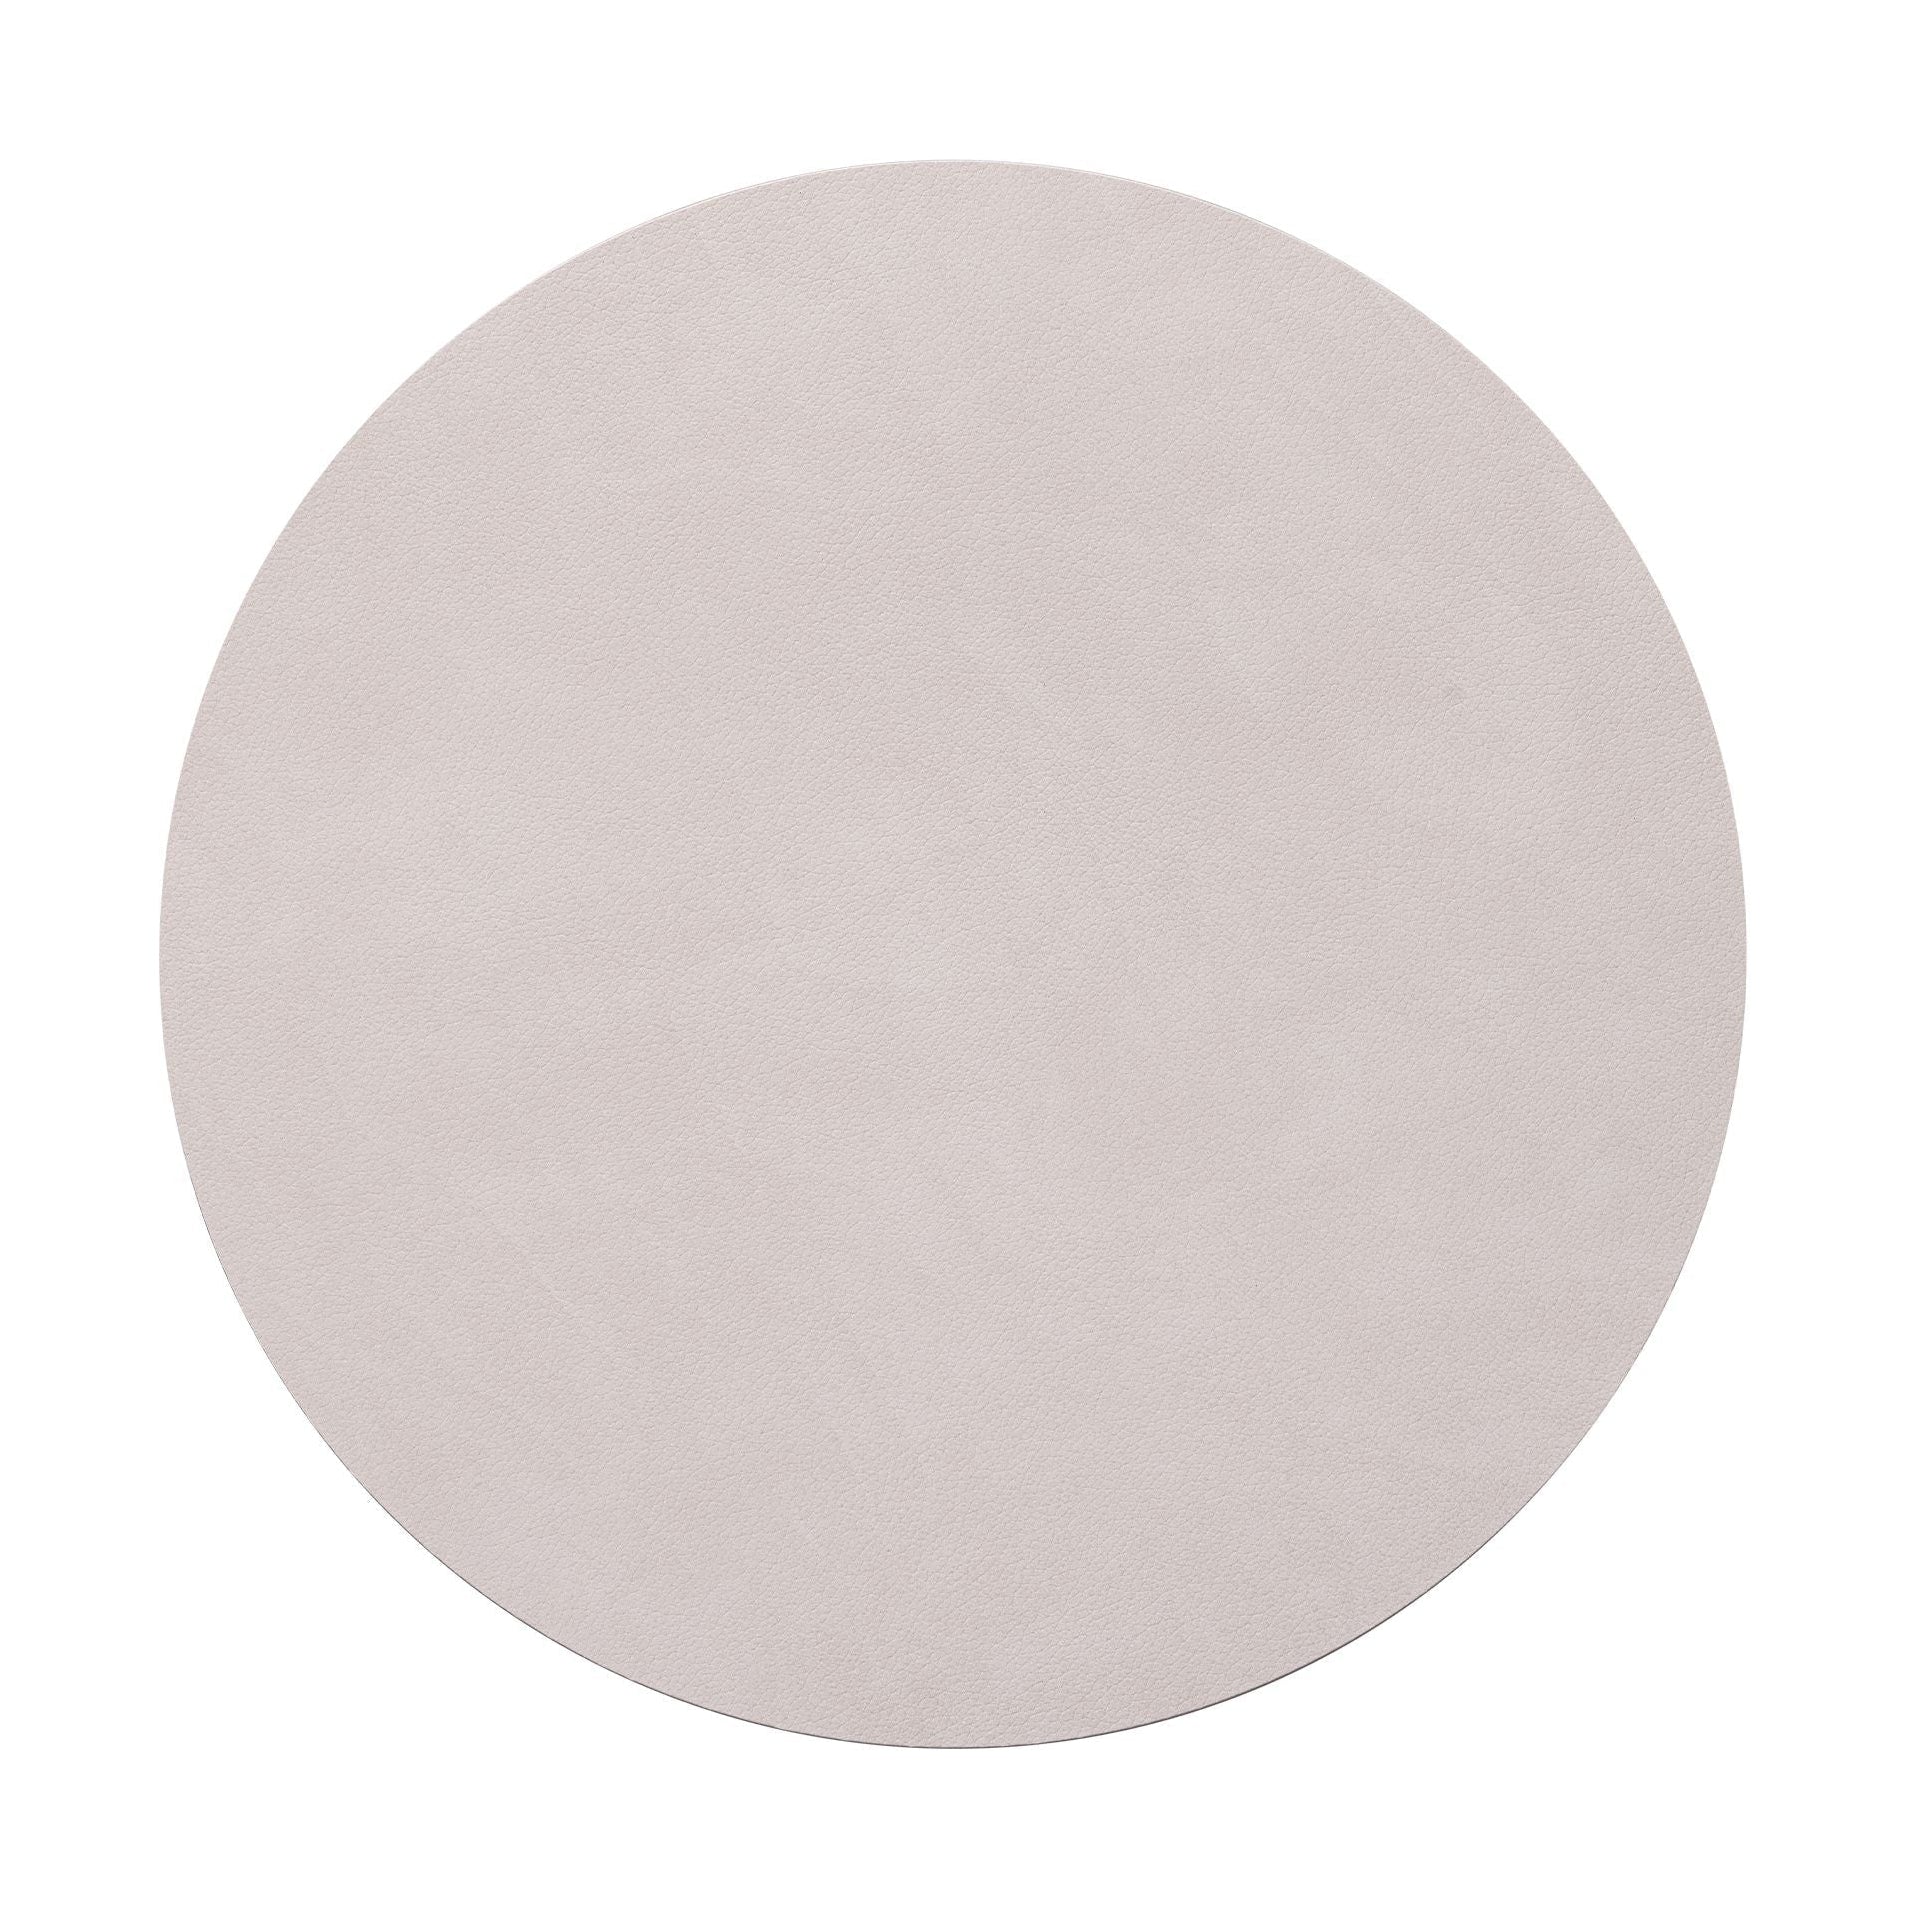 Lind DNA -bord vid Circle M, Oyster White